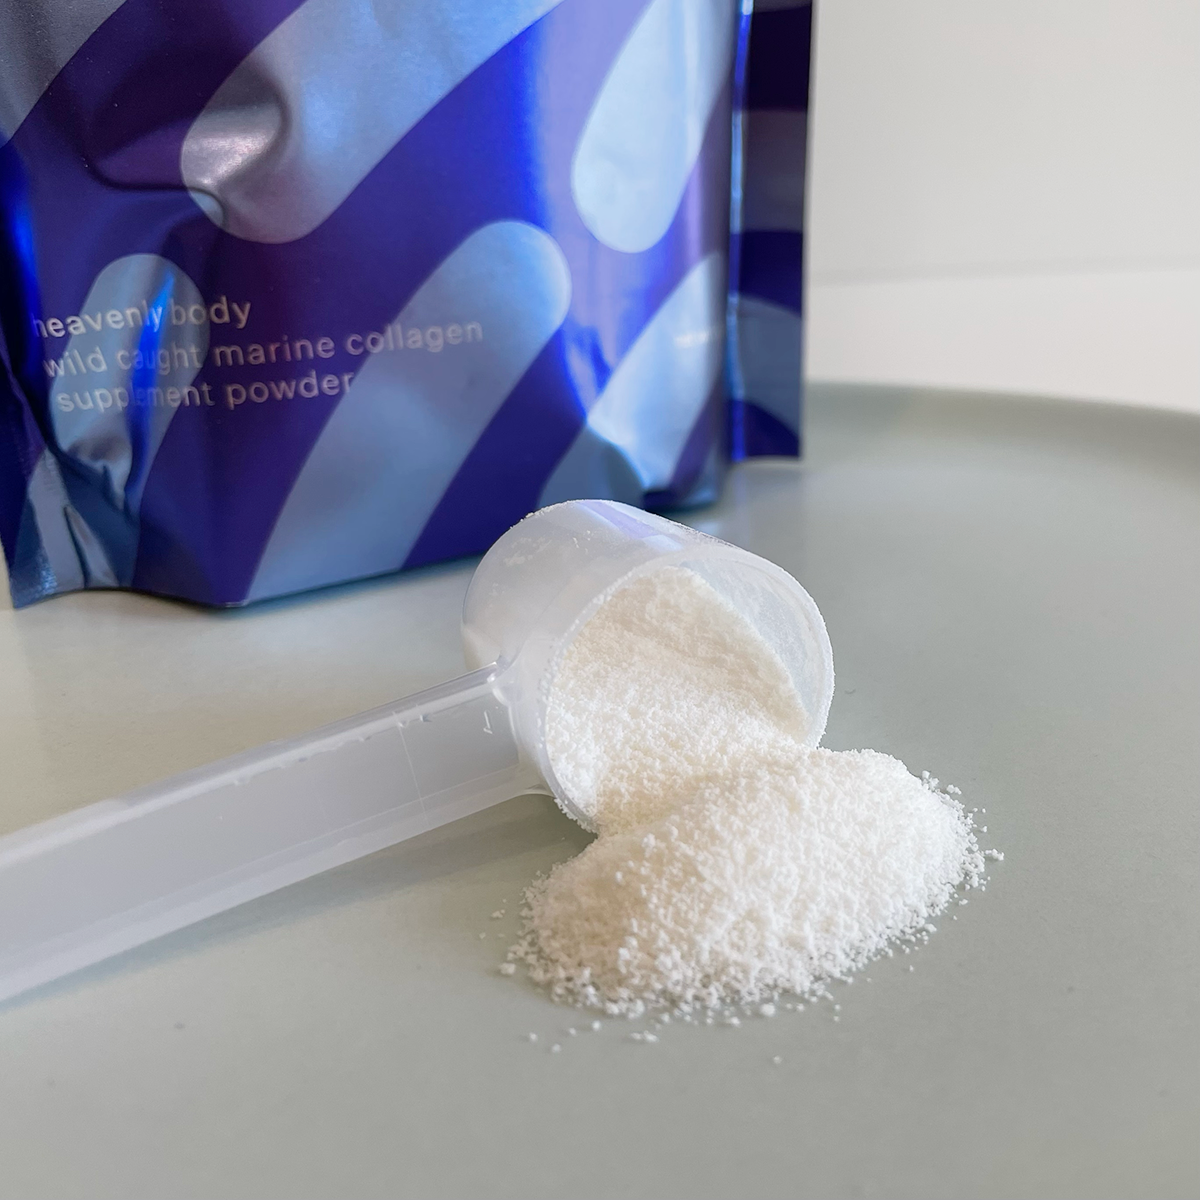 closeup of a scoop of marine collagen powder with the bag in the background